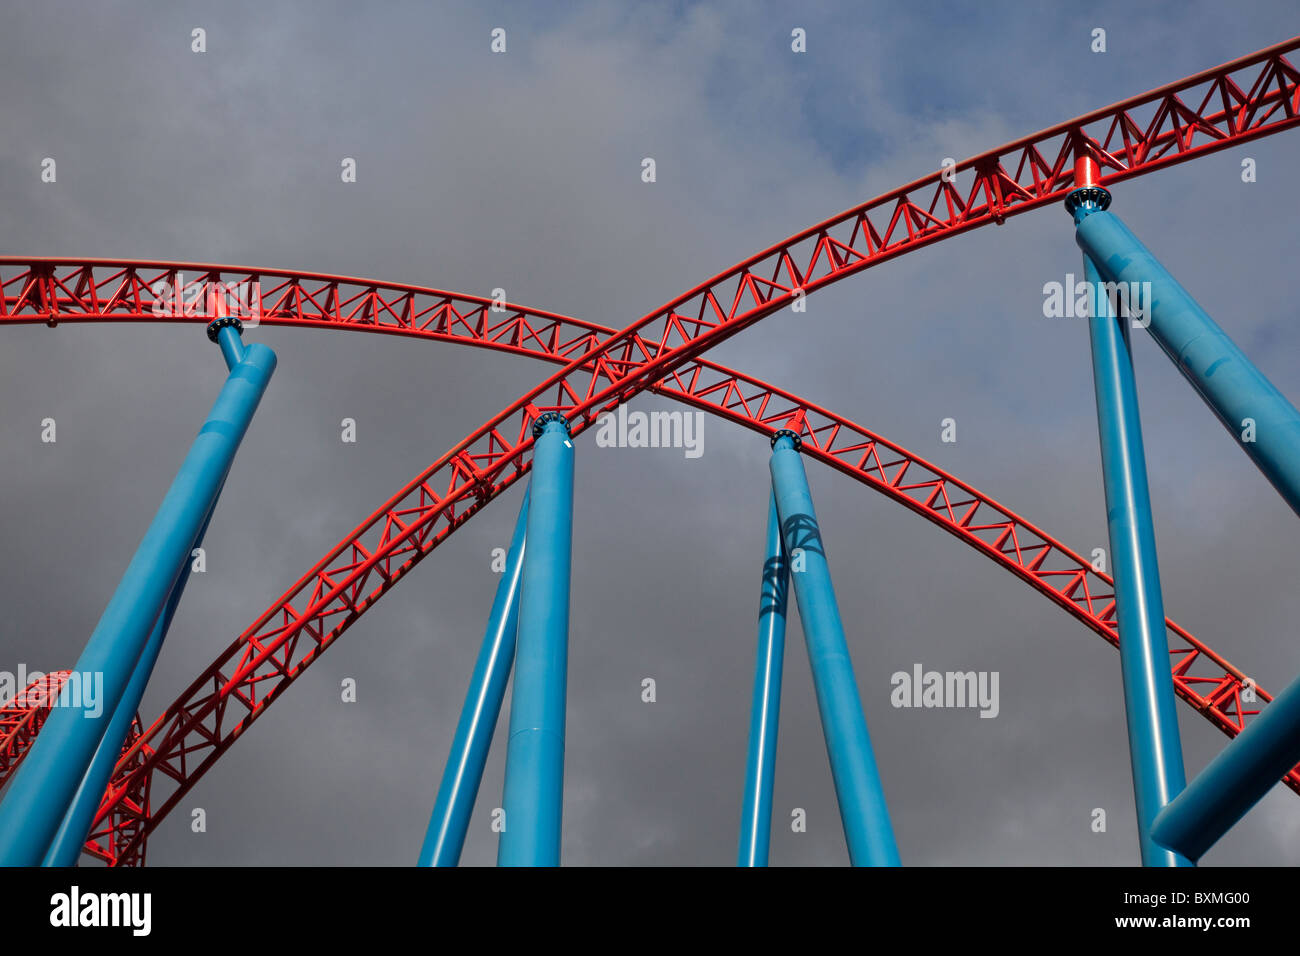 Red roller coaster tracks forming an x shape Stock Photo